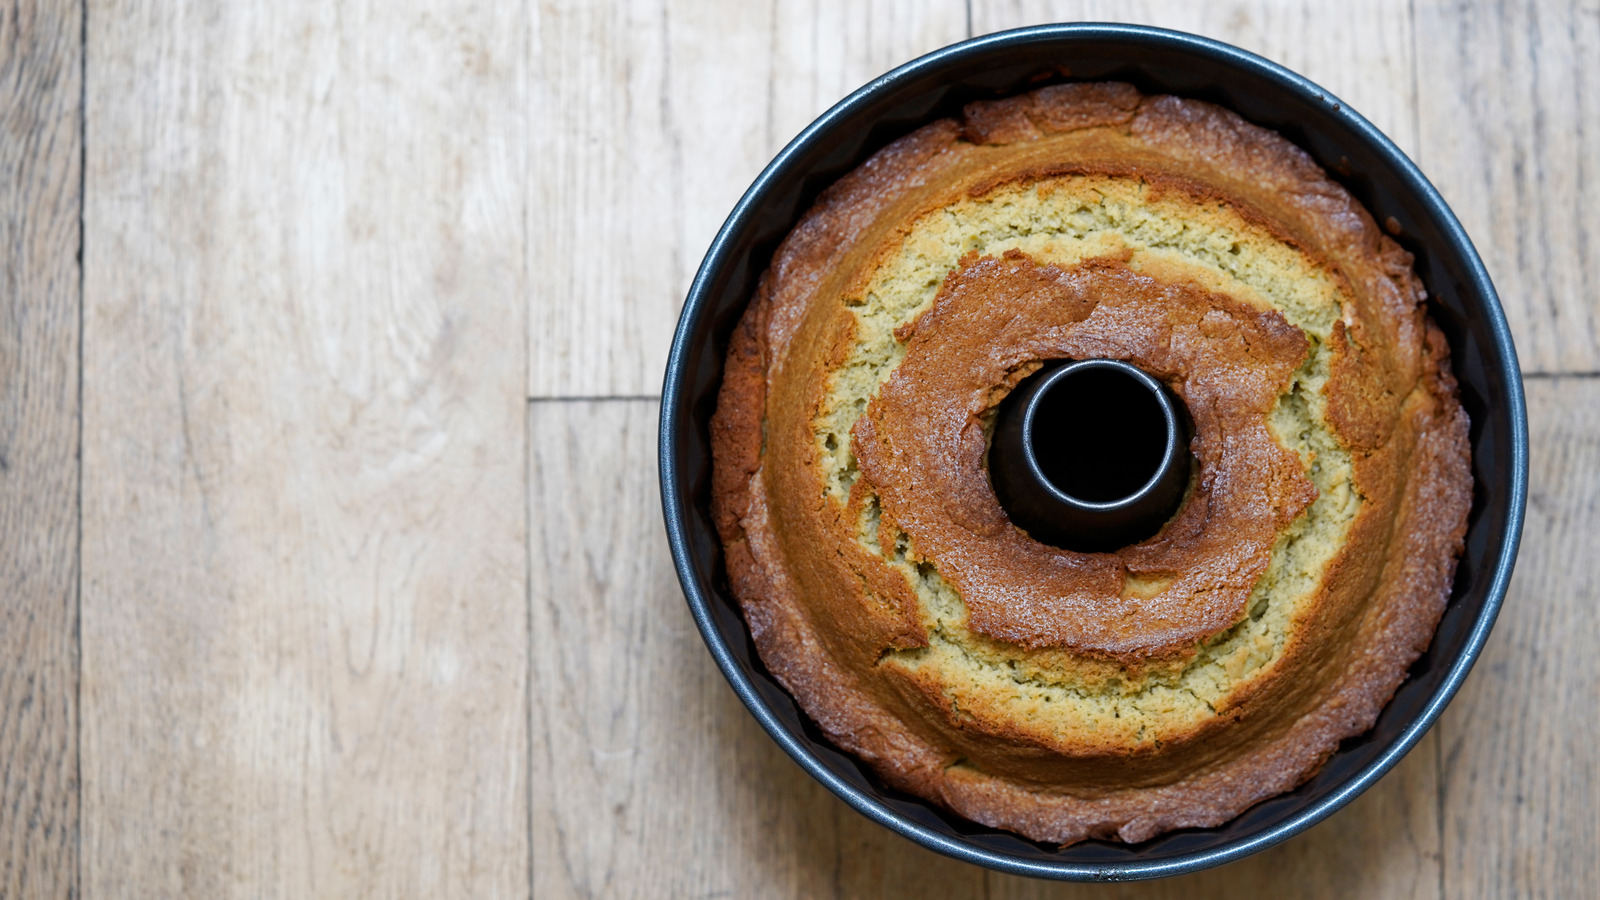 How to Make Your Own DIY Bundt Pan